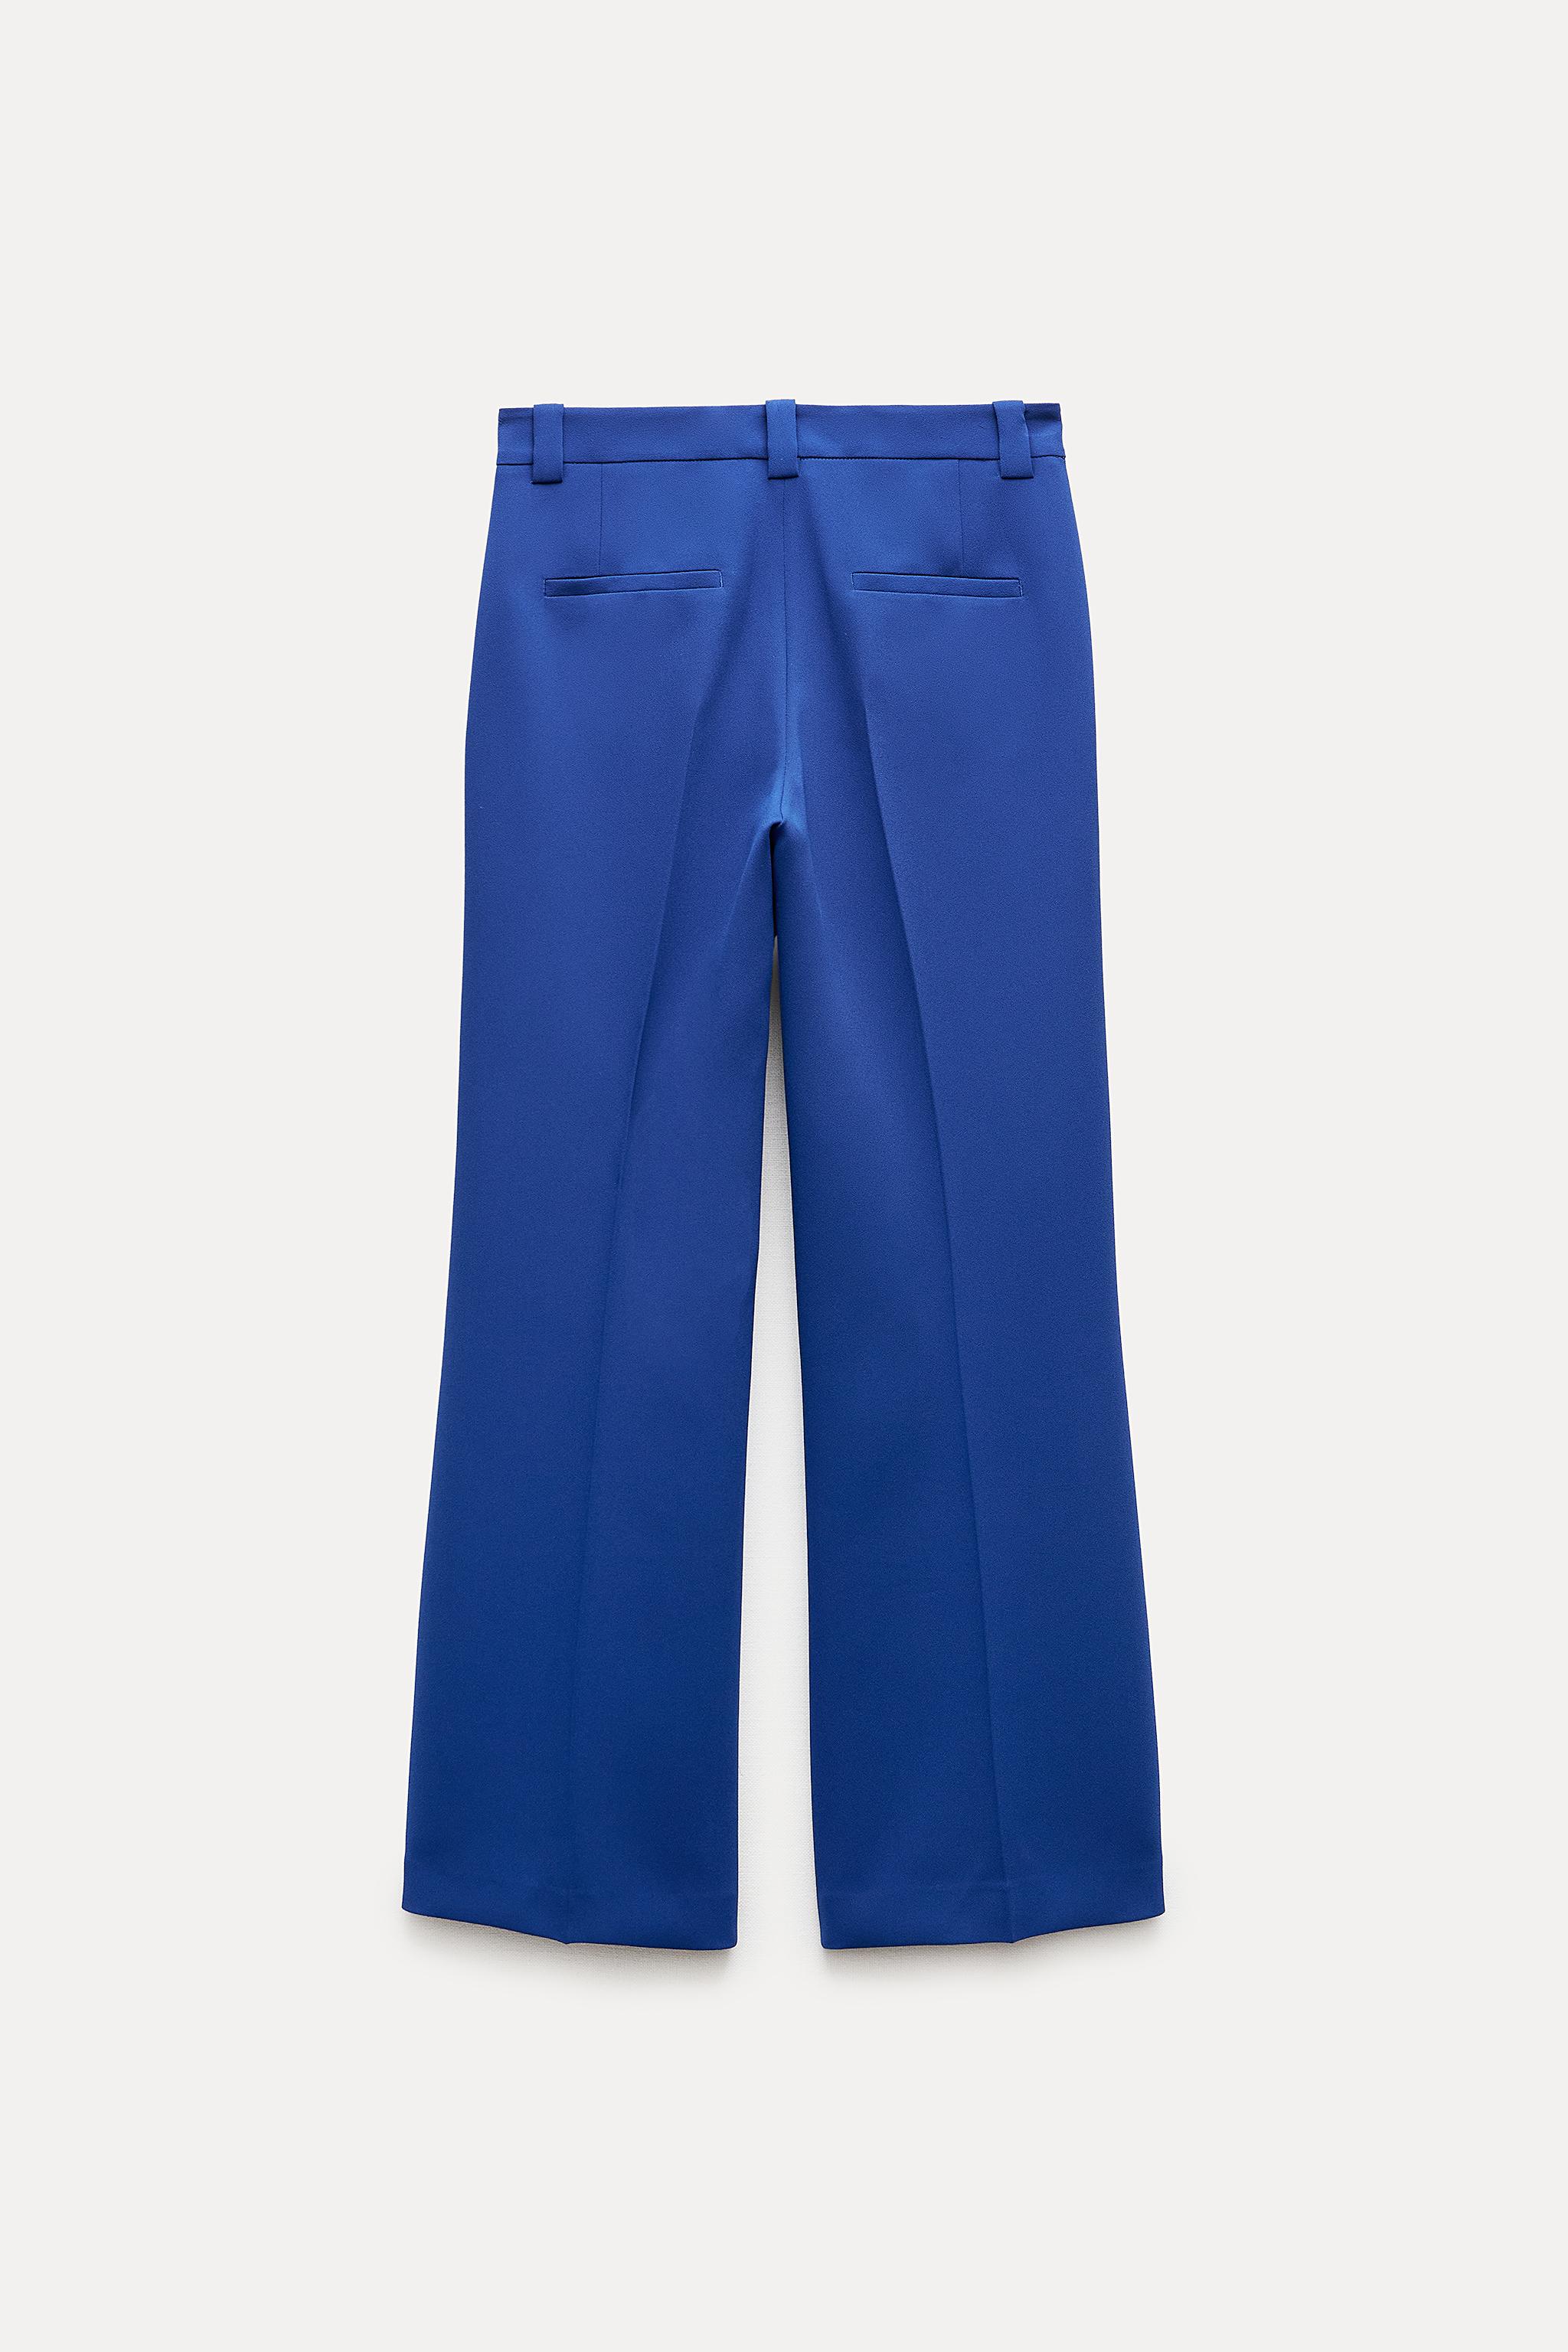 ZARA - WOMAN - GOLD-TONED BUTTON TROUSERS  Clothes, Blue trousers outfit,  Pants for women